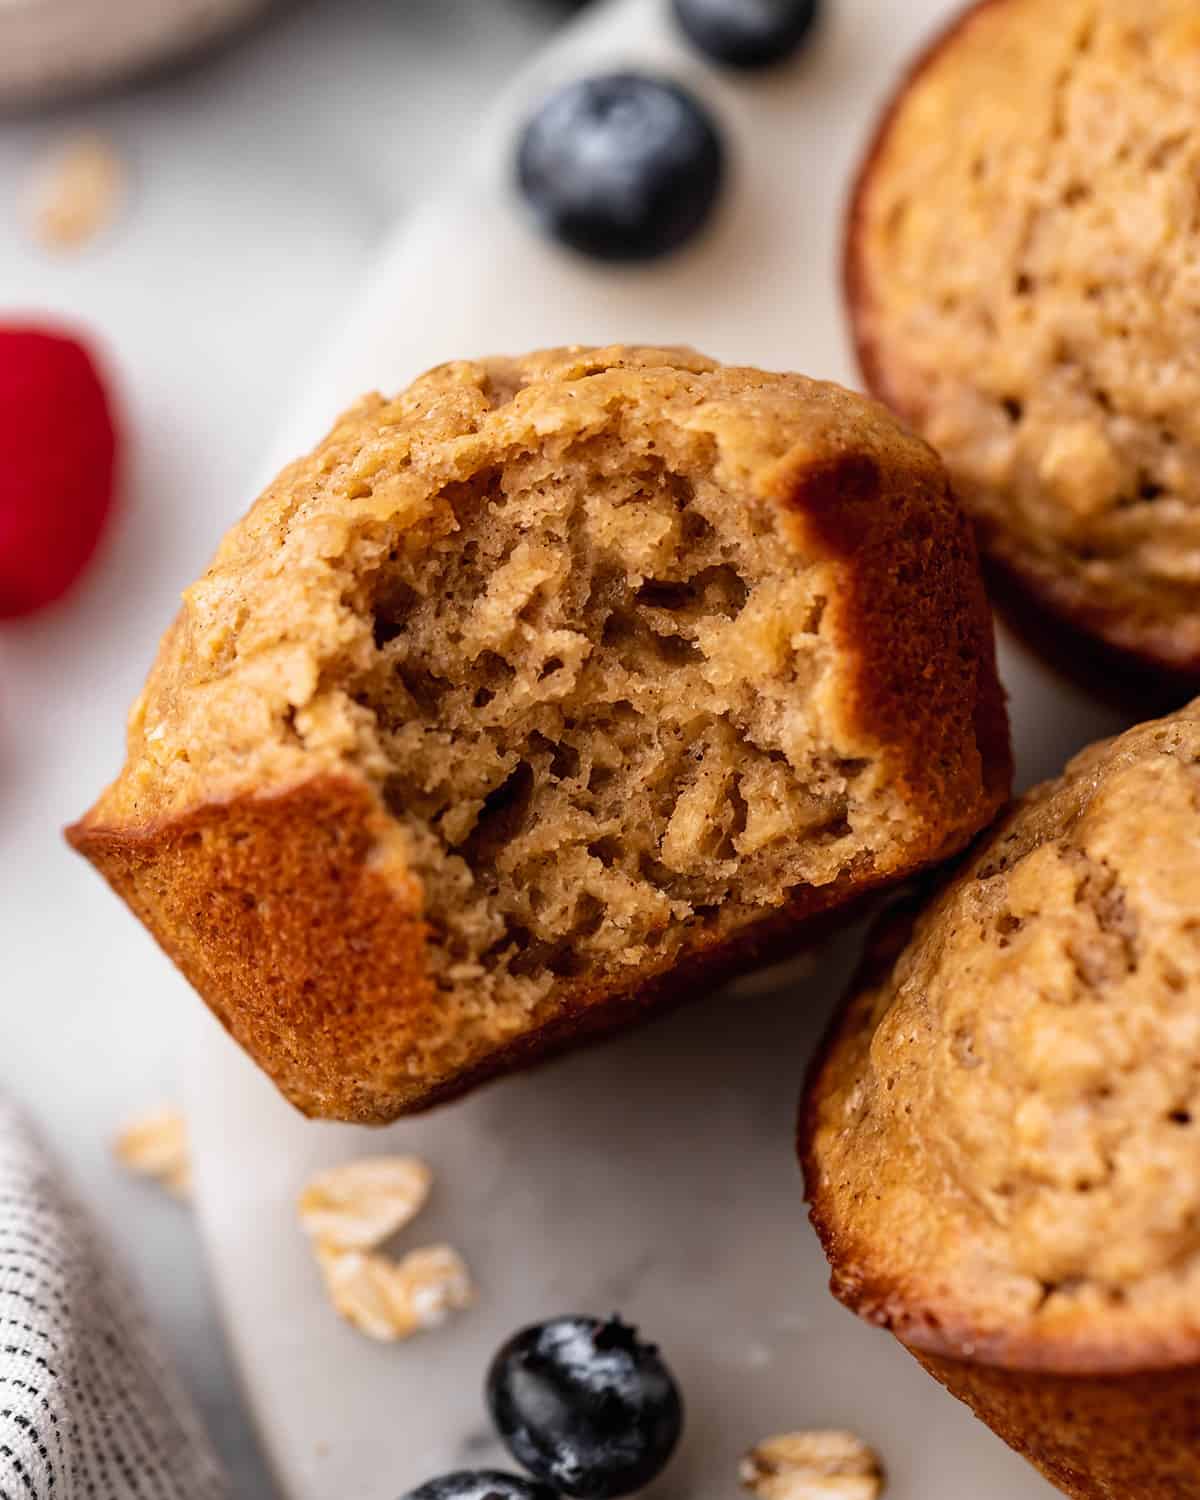 up close photo of an Oatmeal Muffin with a bite taken out of it